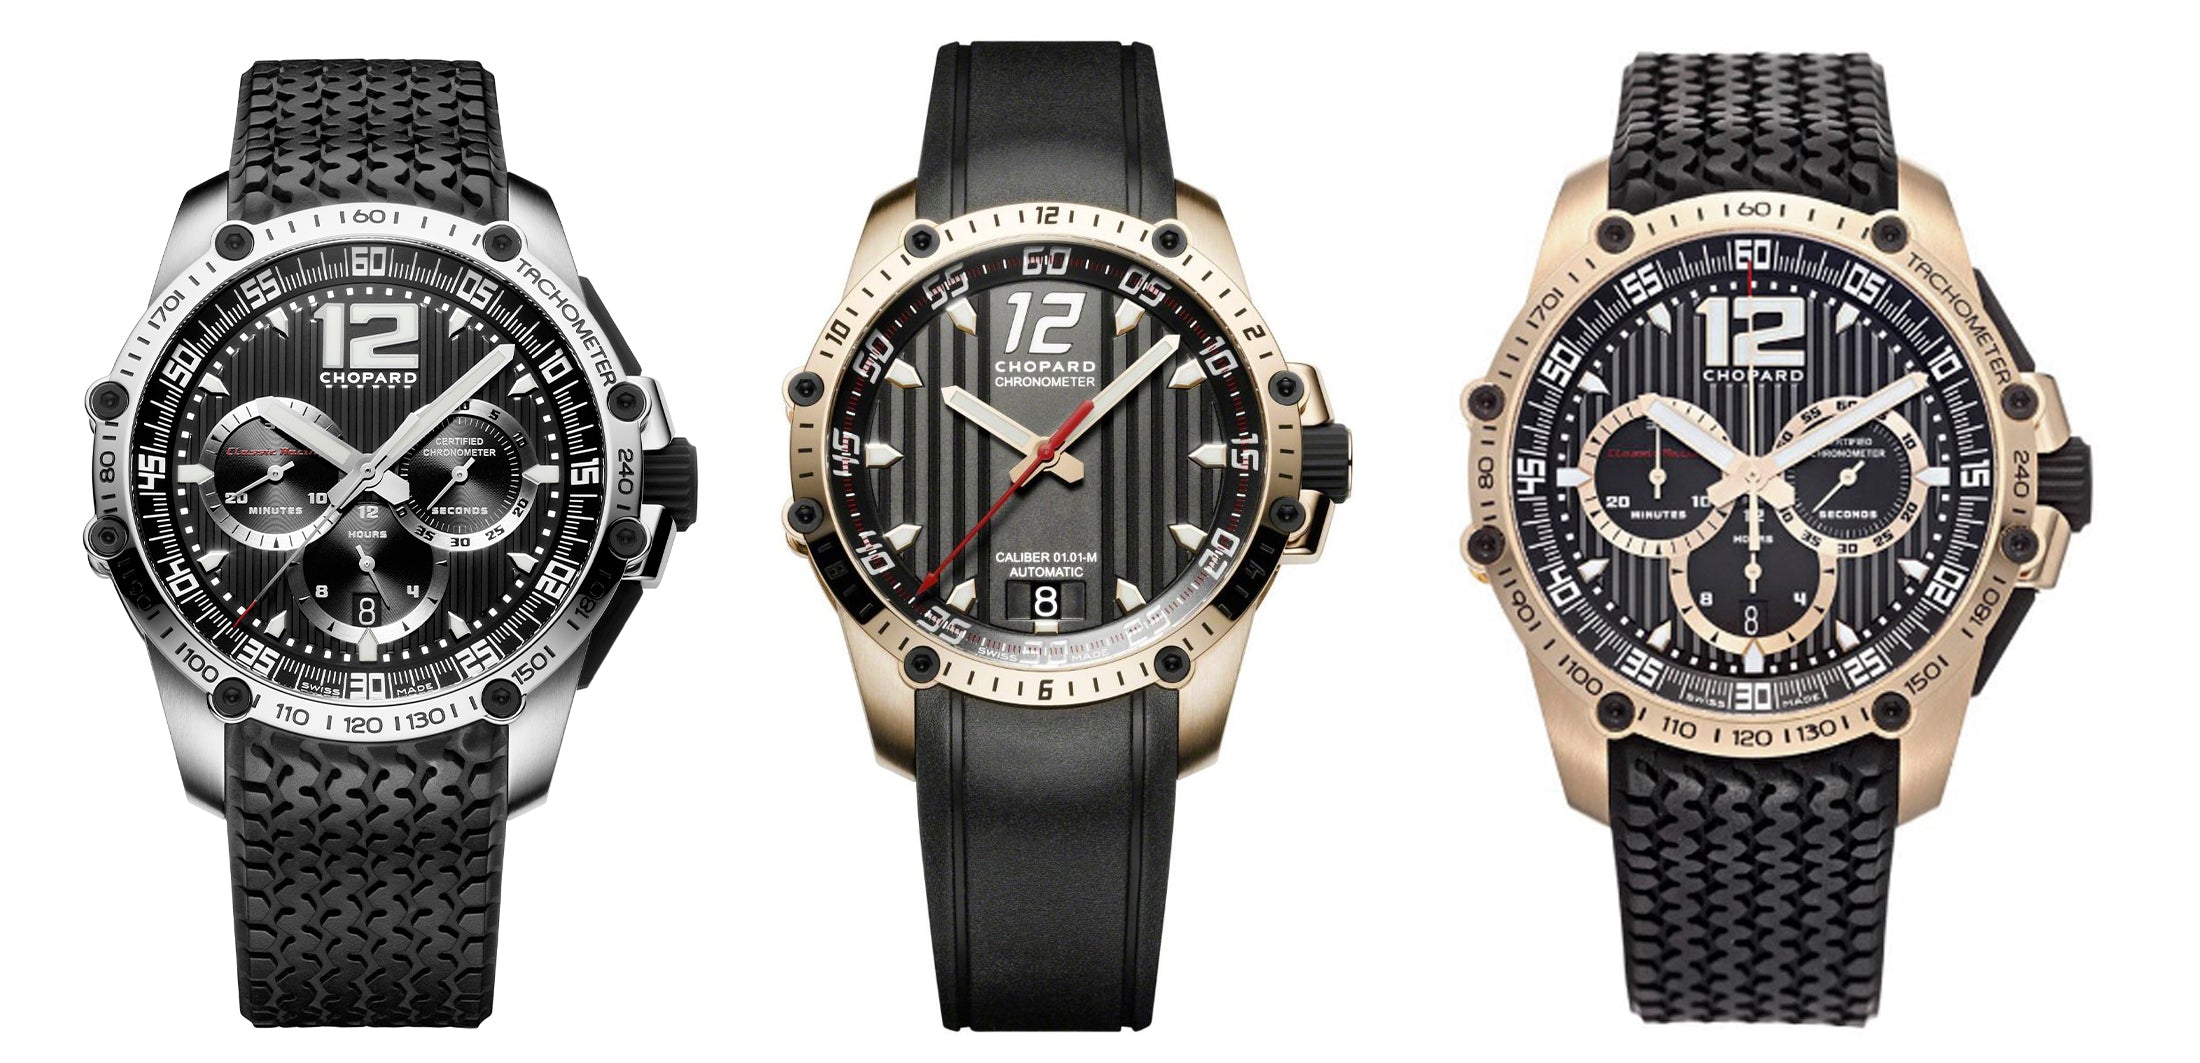 Chopard Chronograph Superfast 3 watches